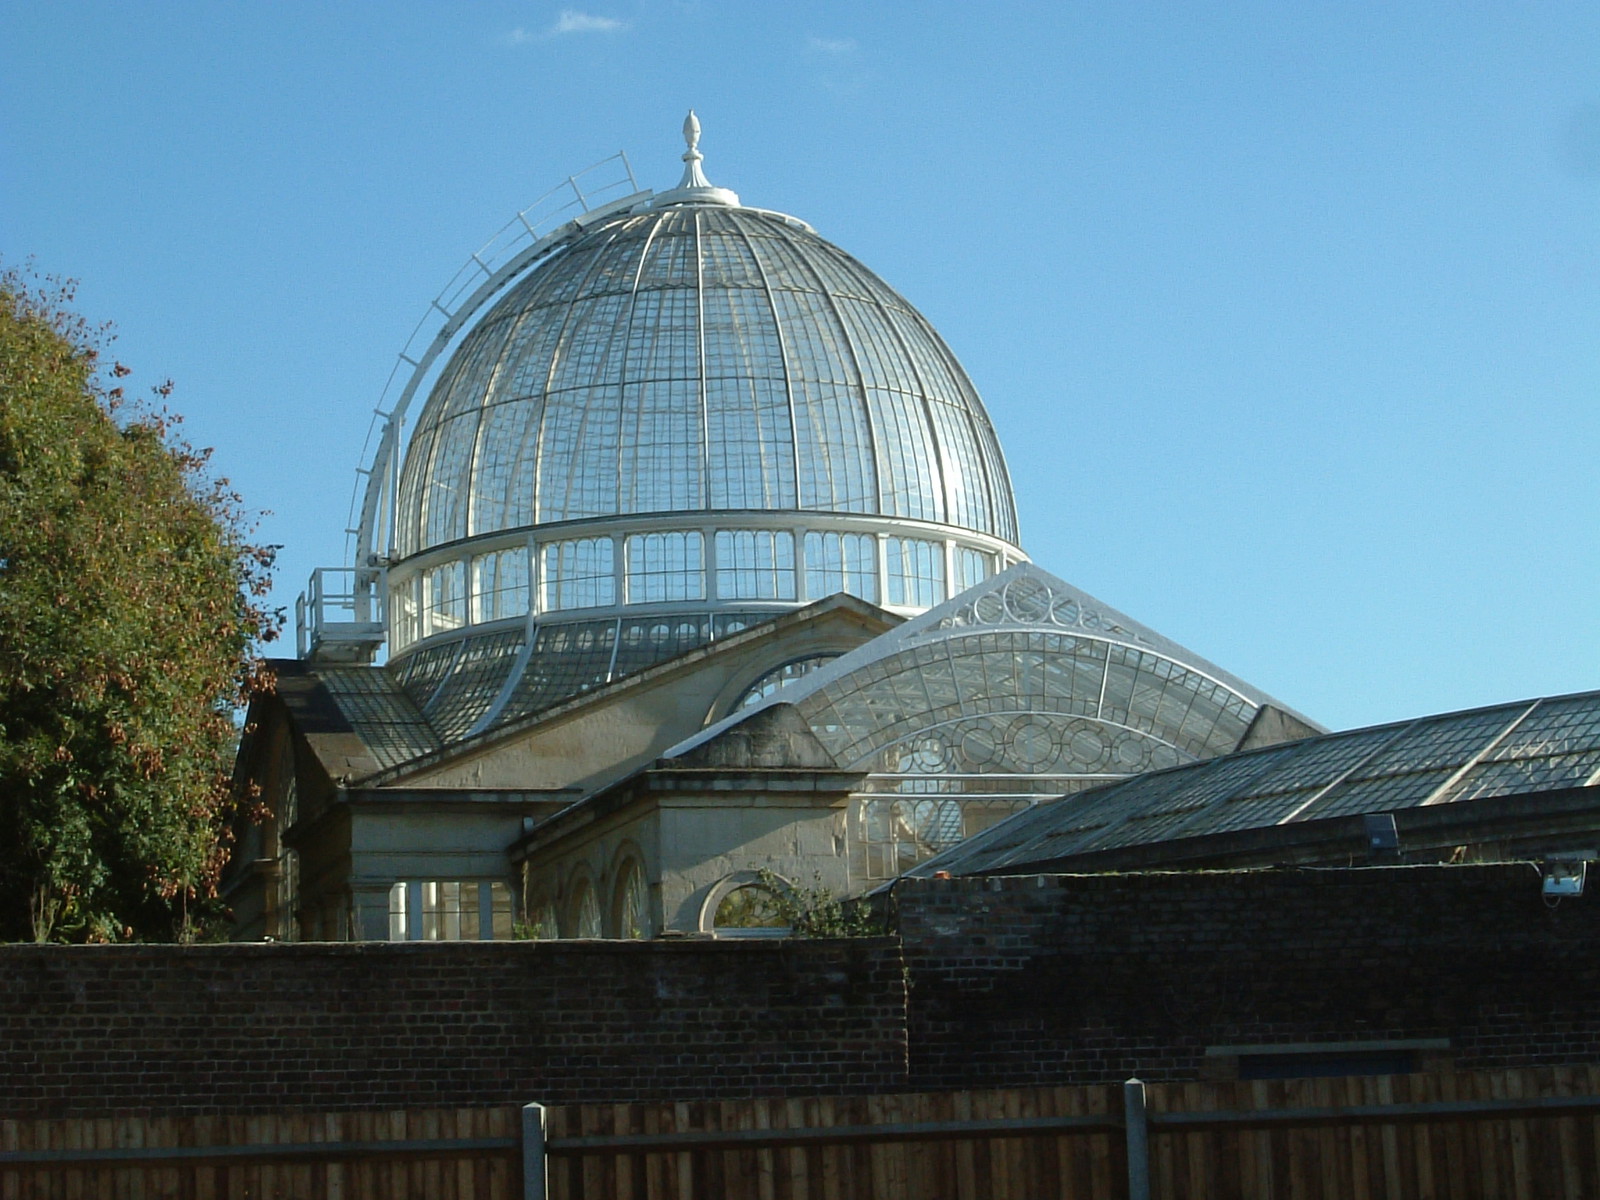 The main conservatory, Syon House